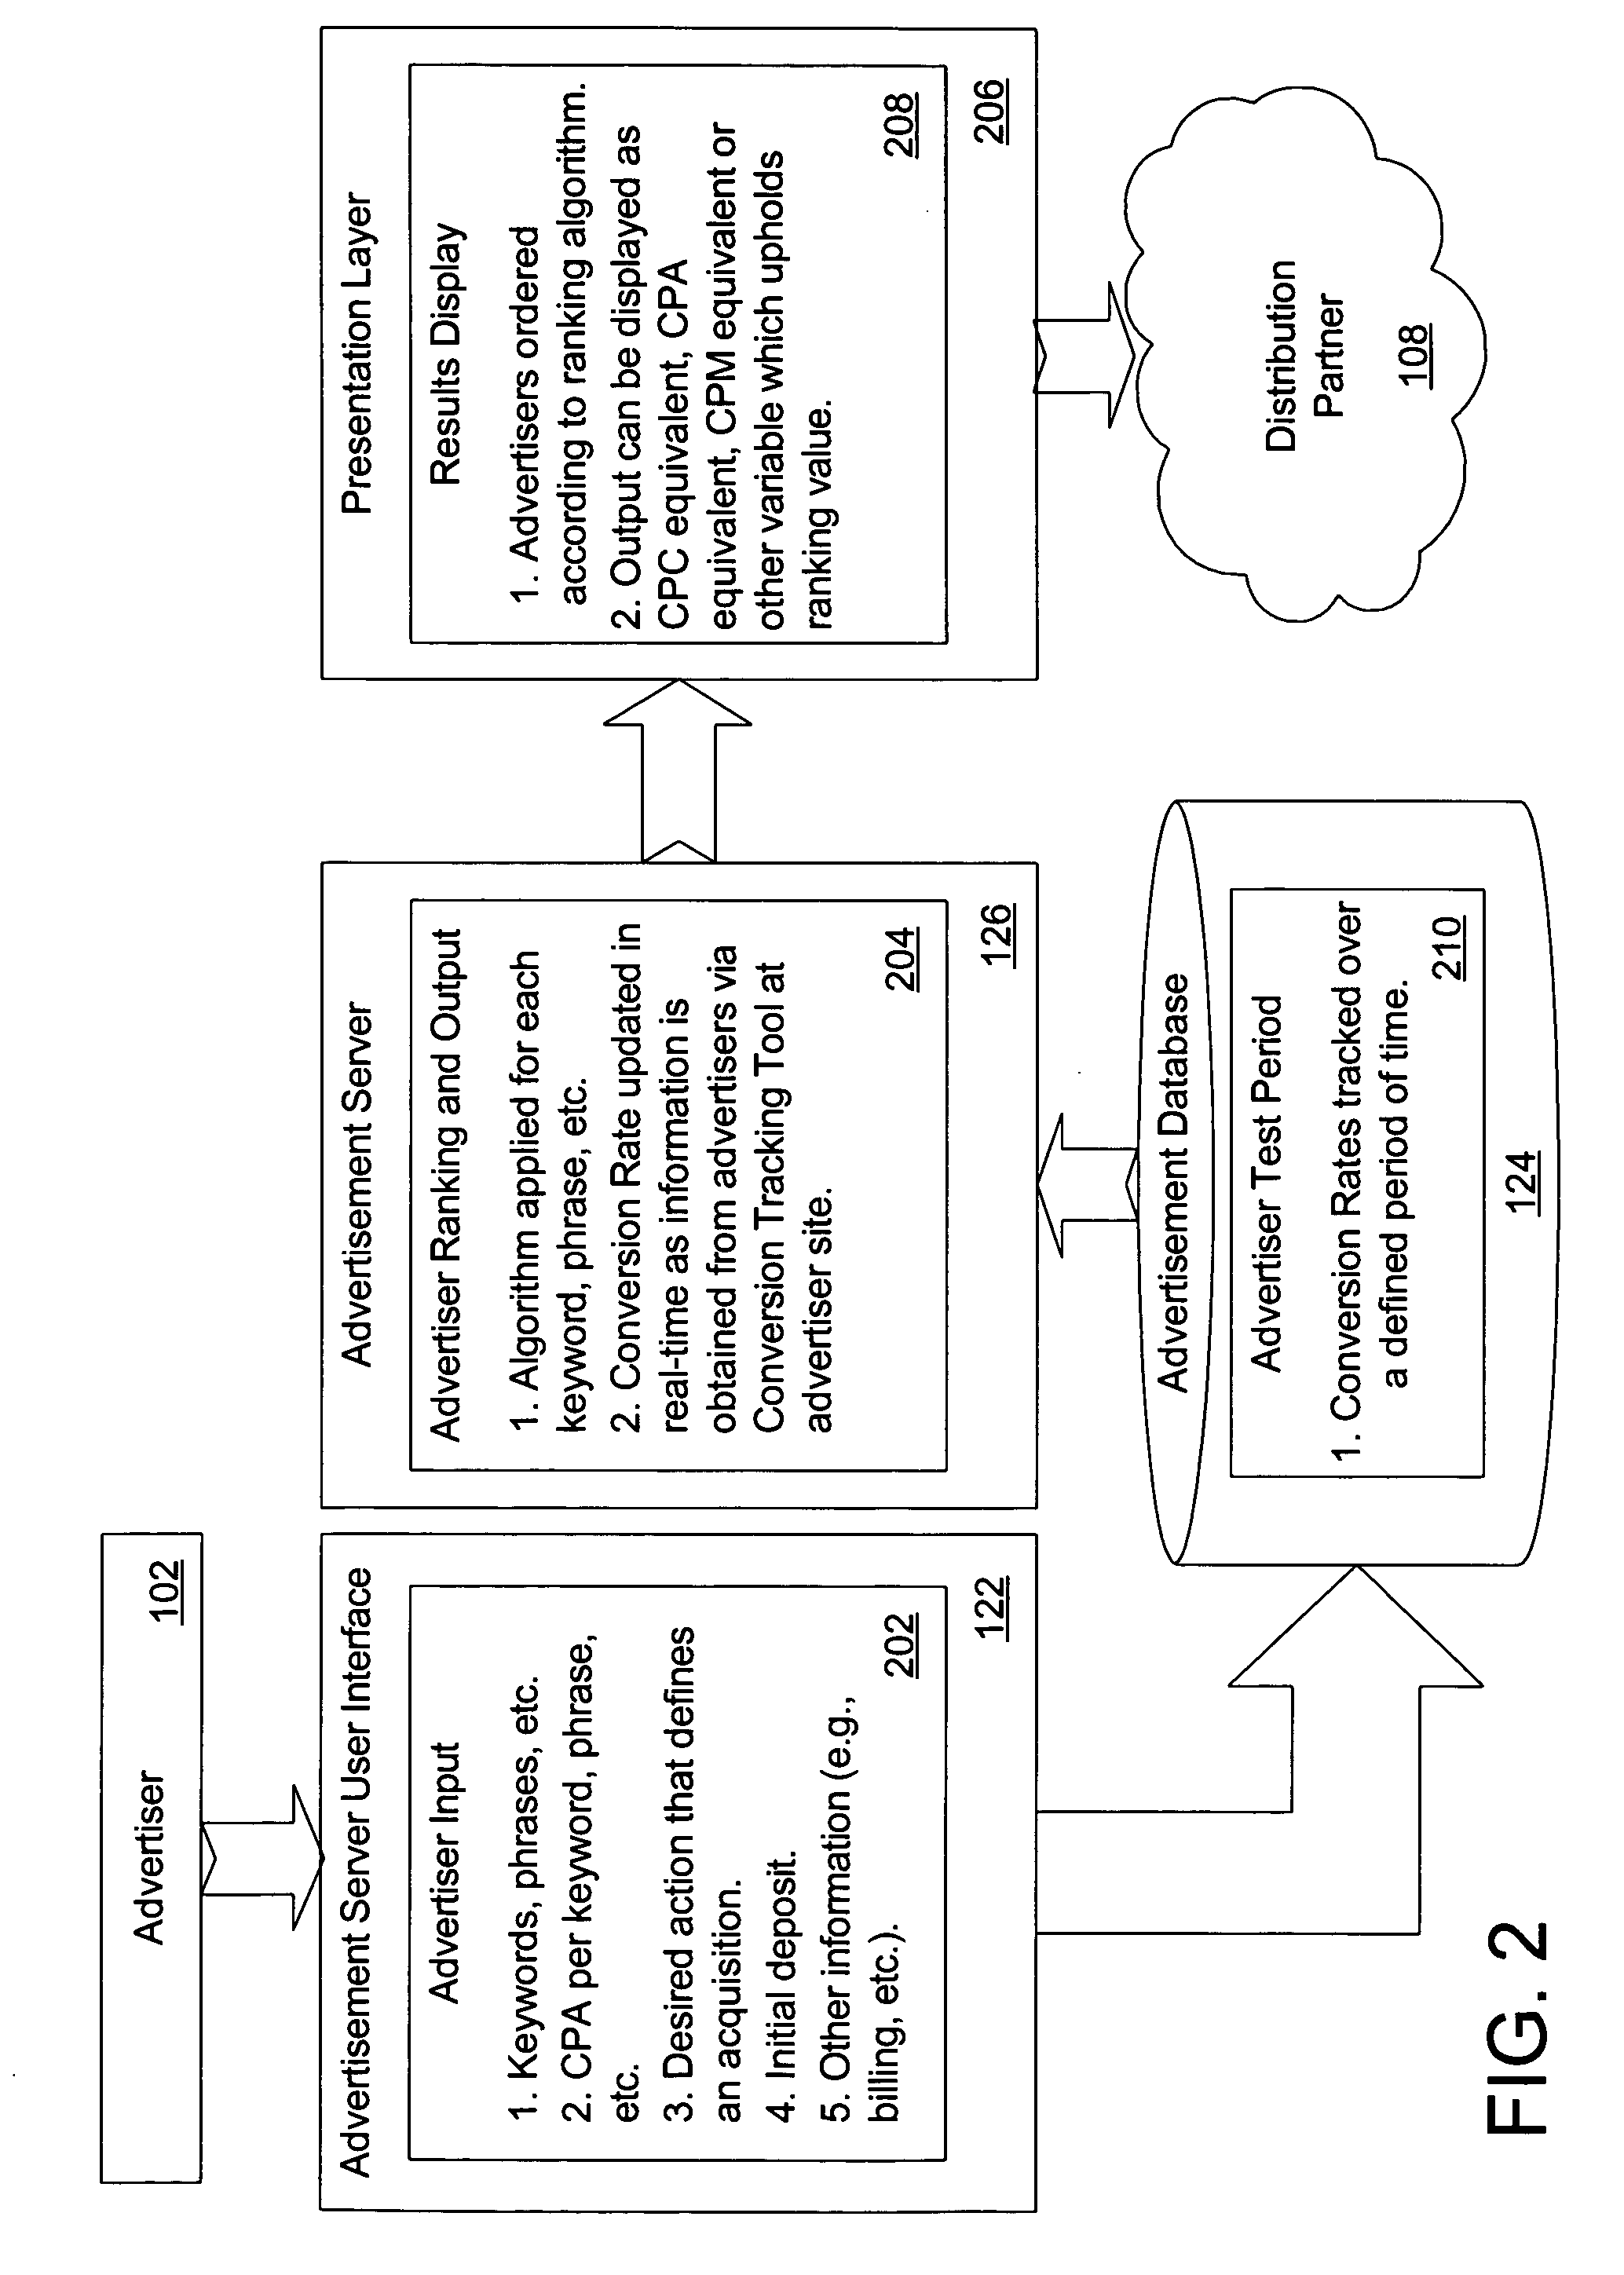 Performance-based online advertising system and method